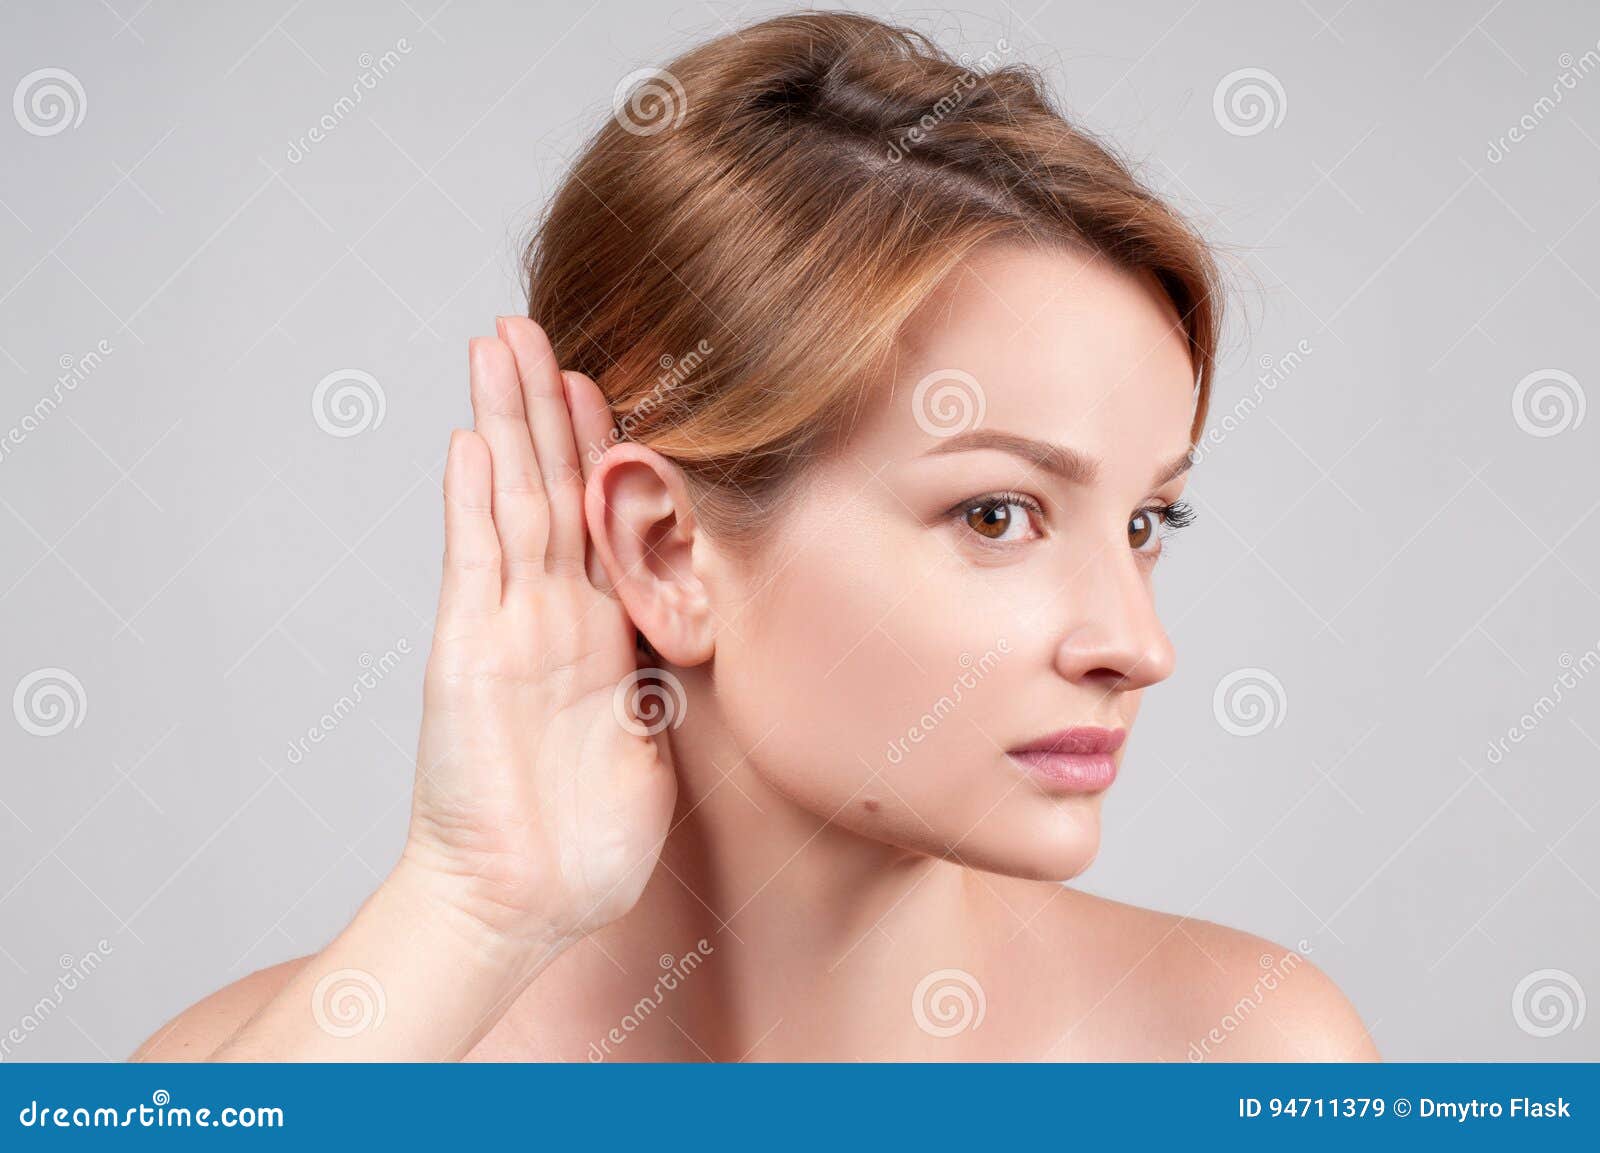 Woman Hold Hand Near Her Ear And Listening Carefully Stock Image